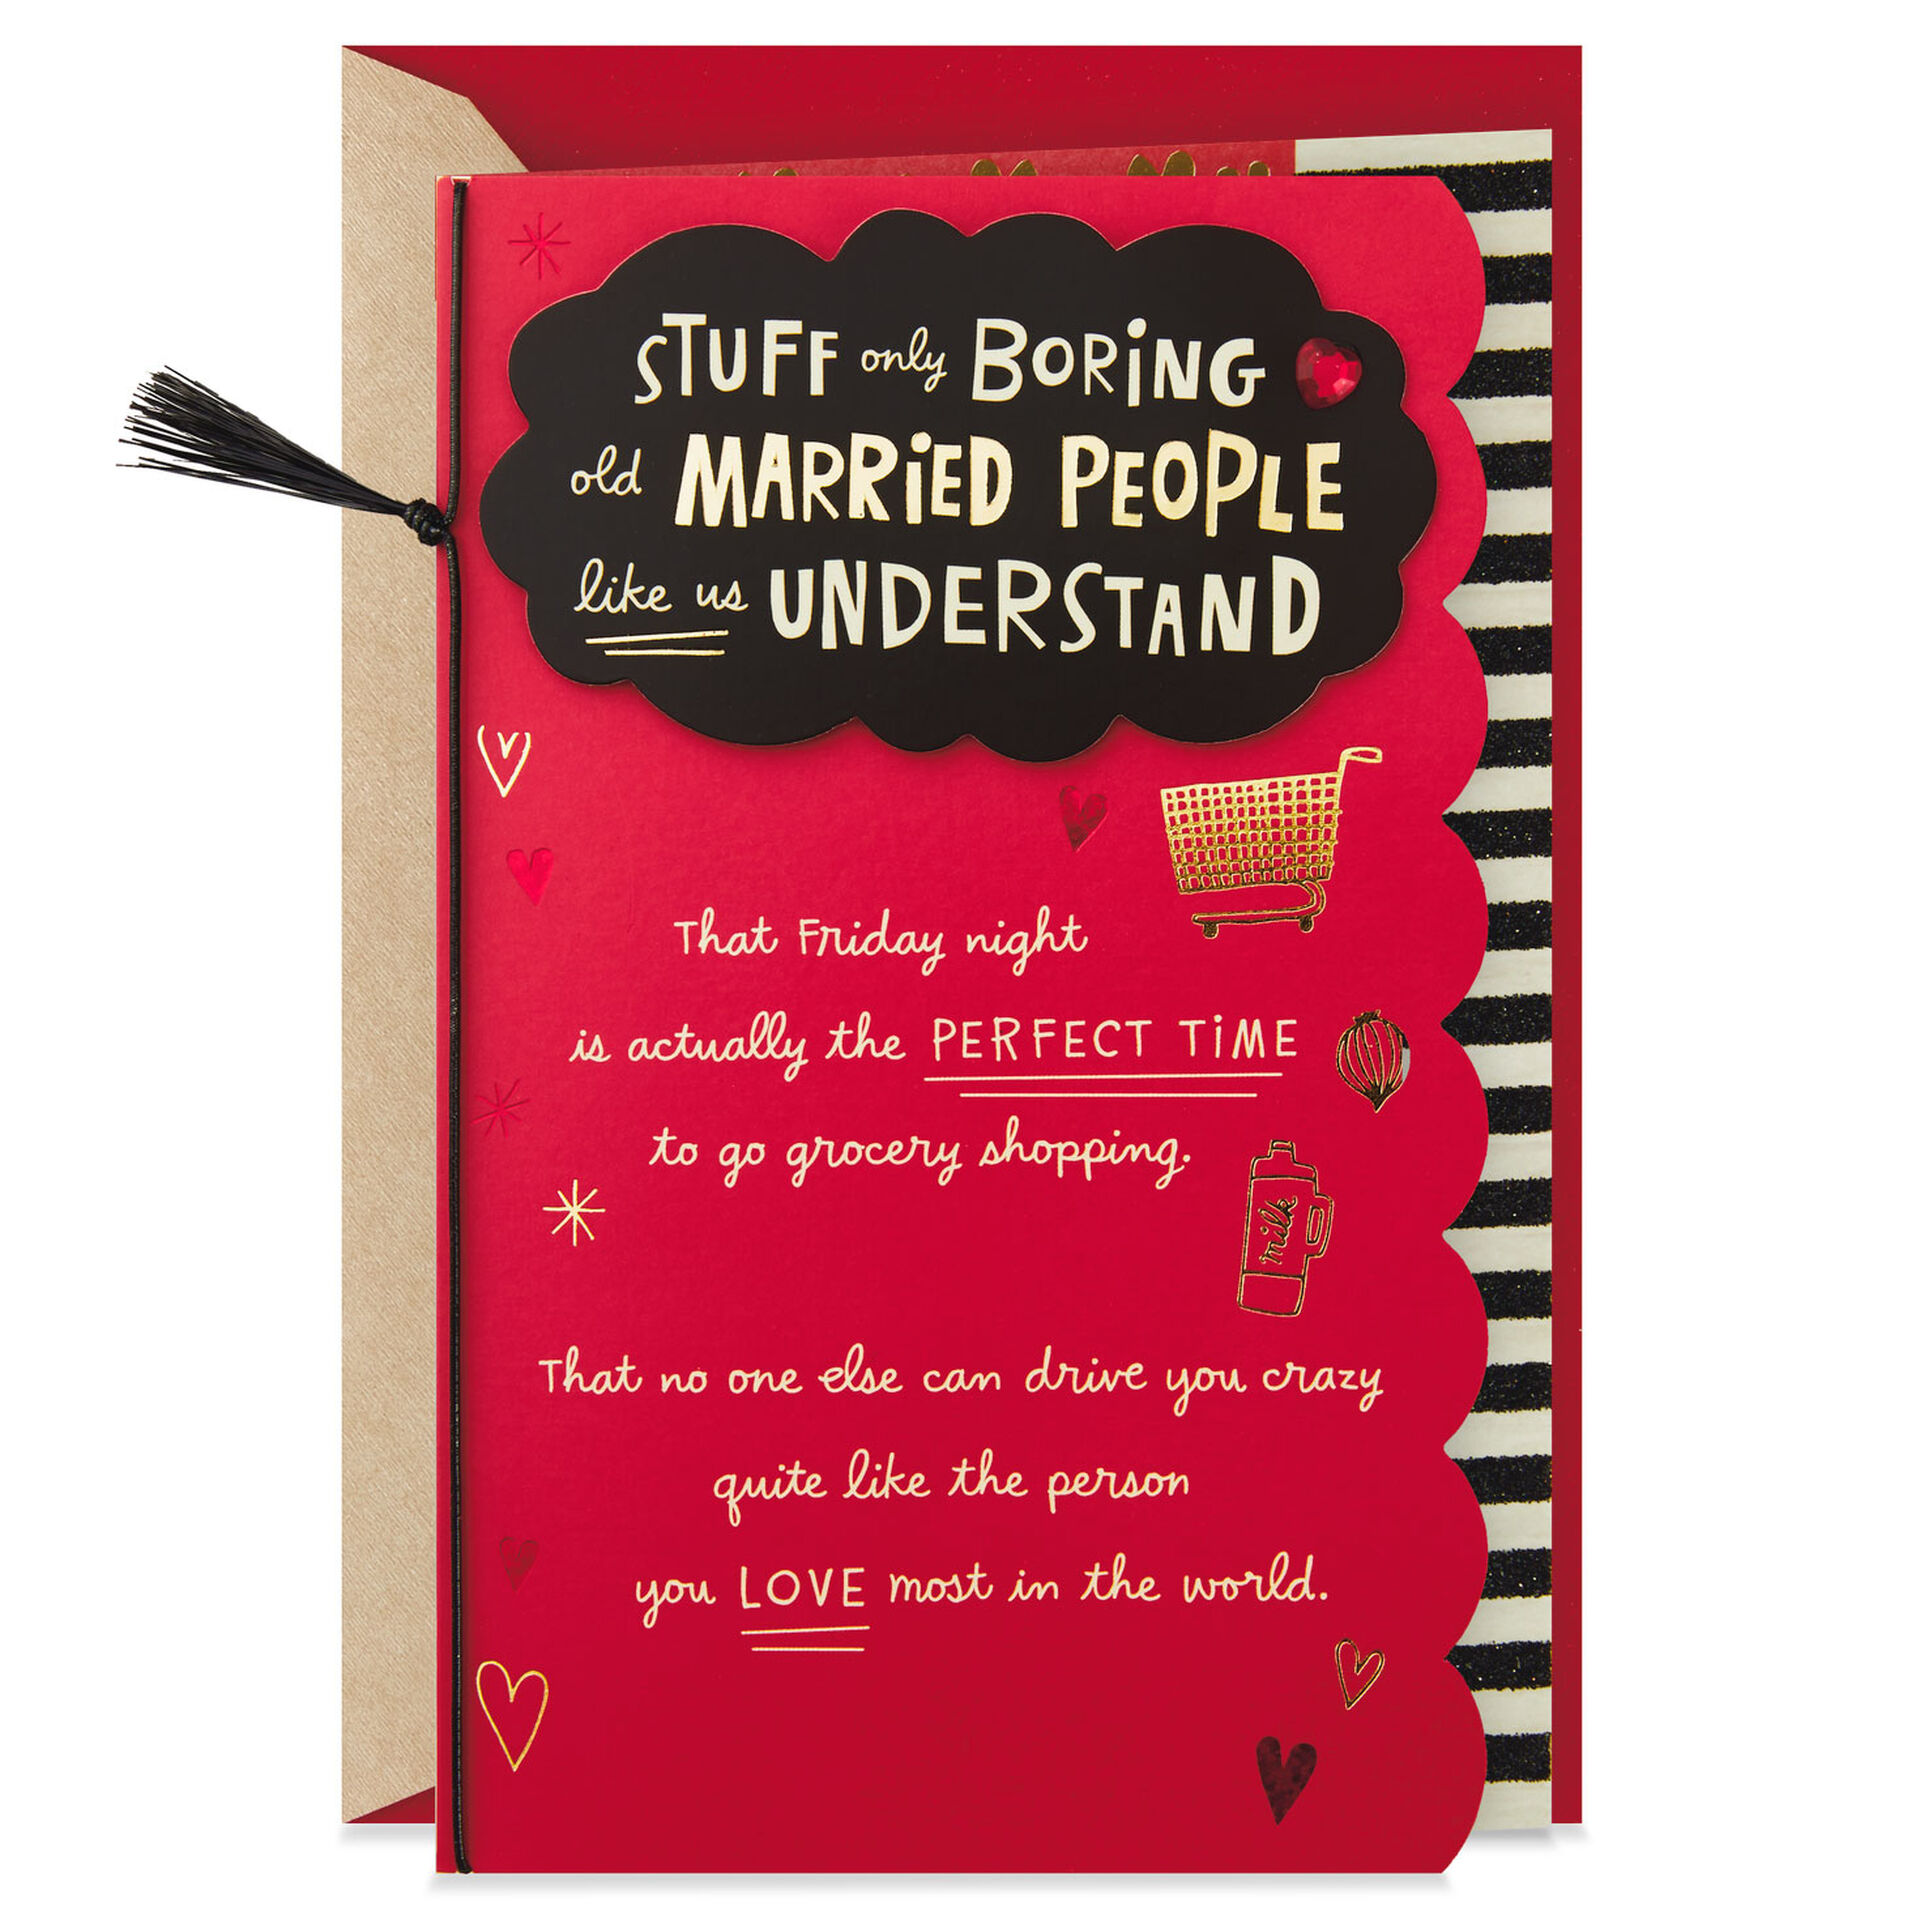 Stuff-Old-Married-People-Understand-Funny-Valentines-Day-Card_699VEE6962_01